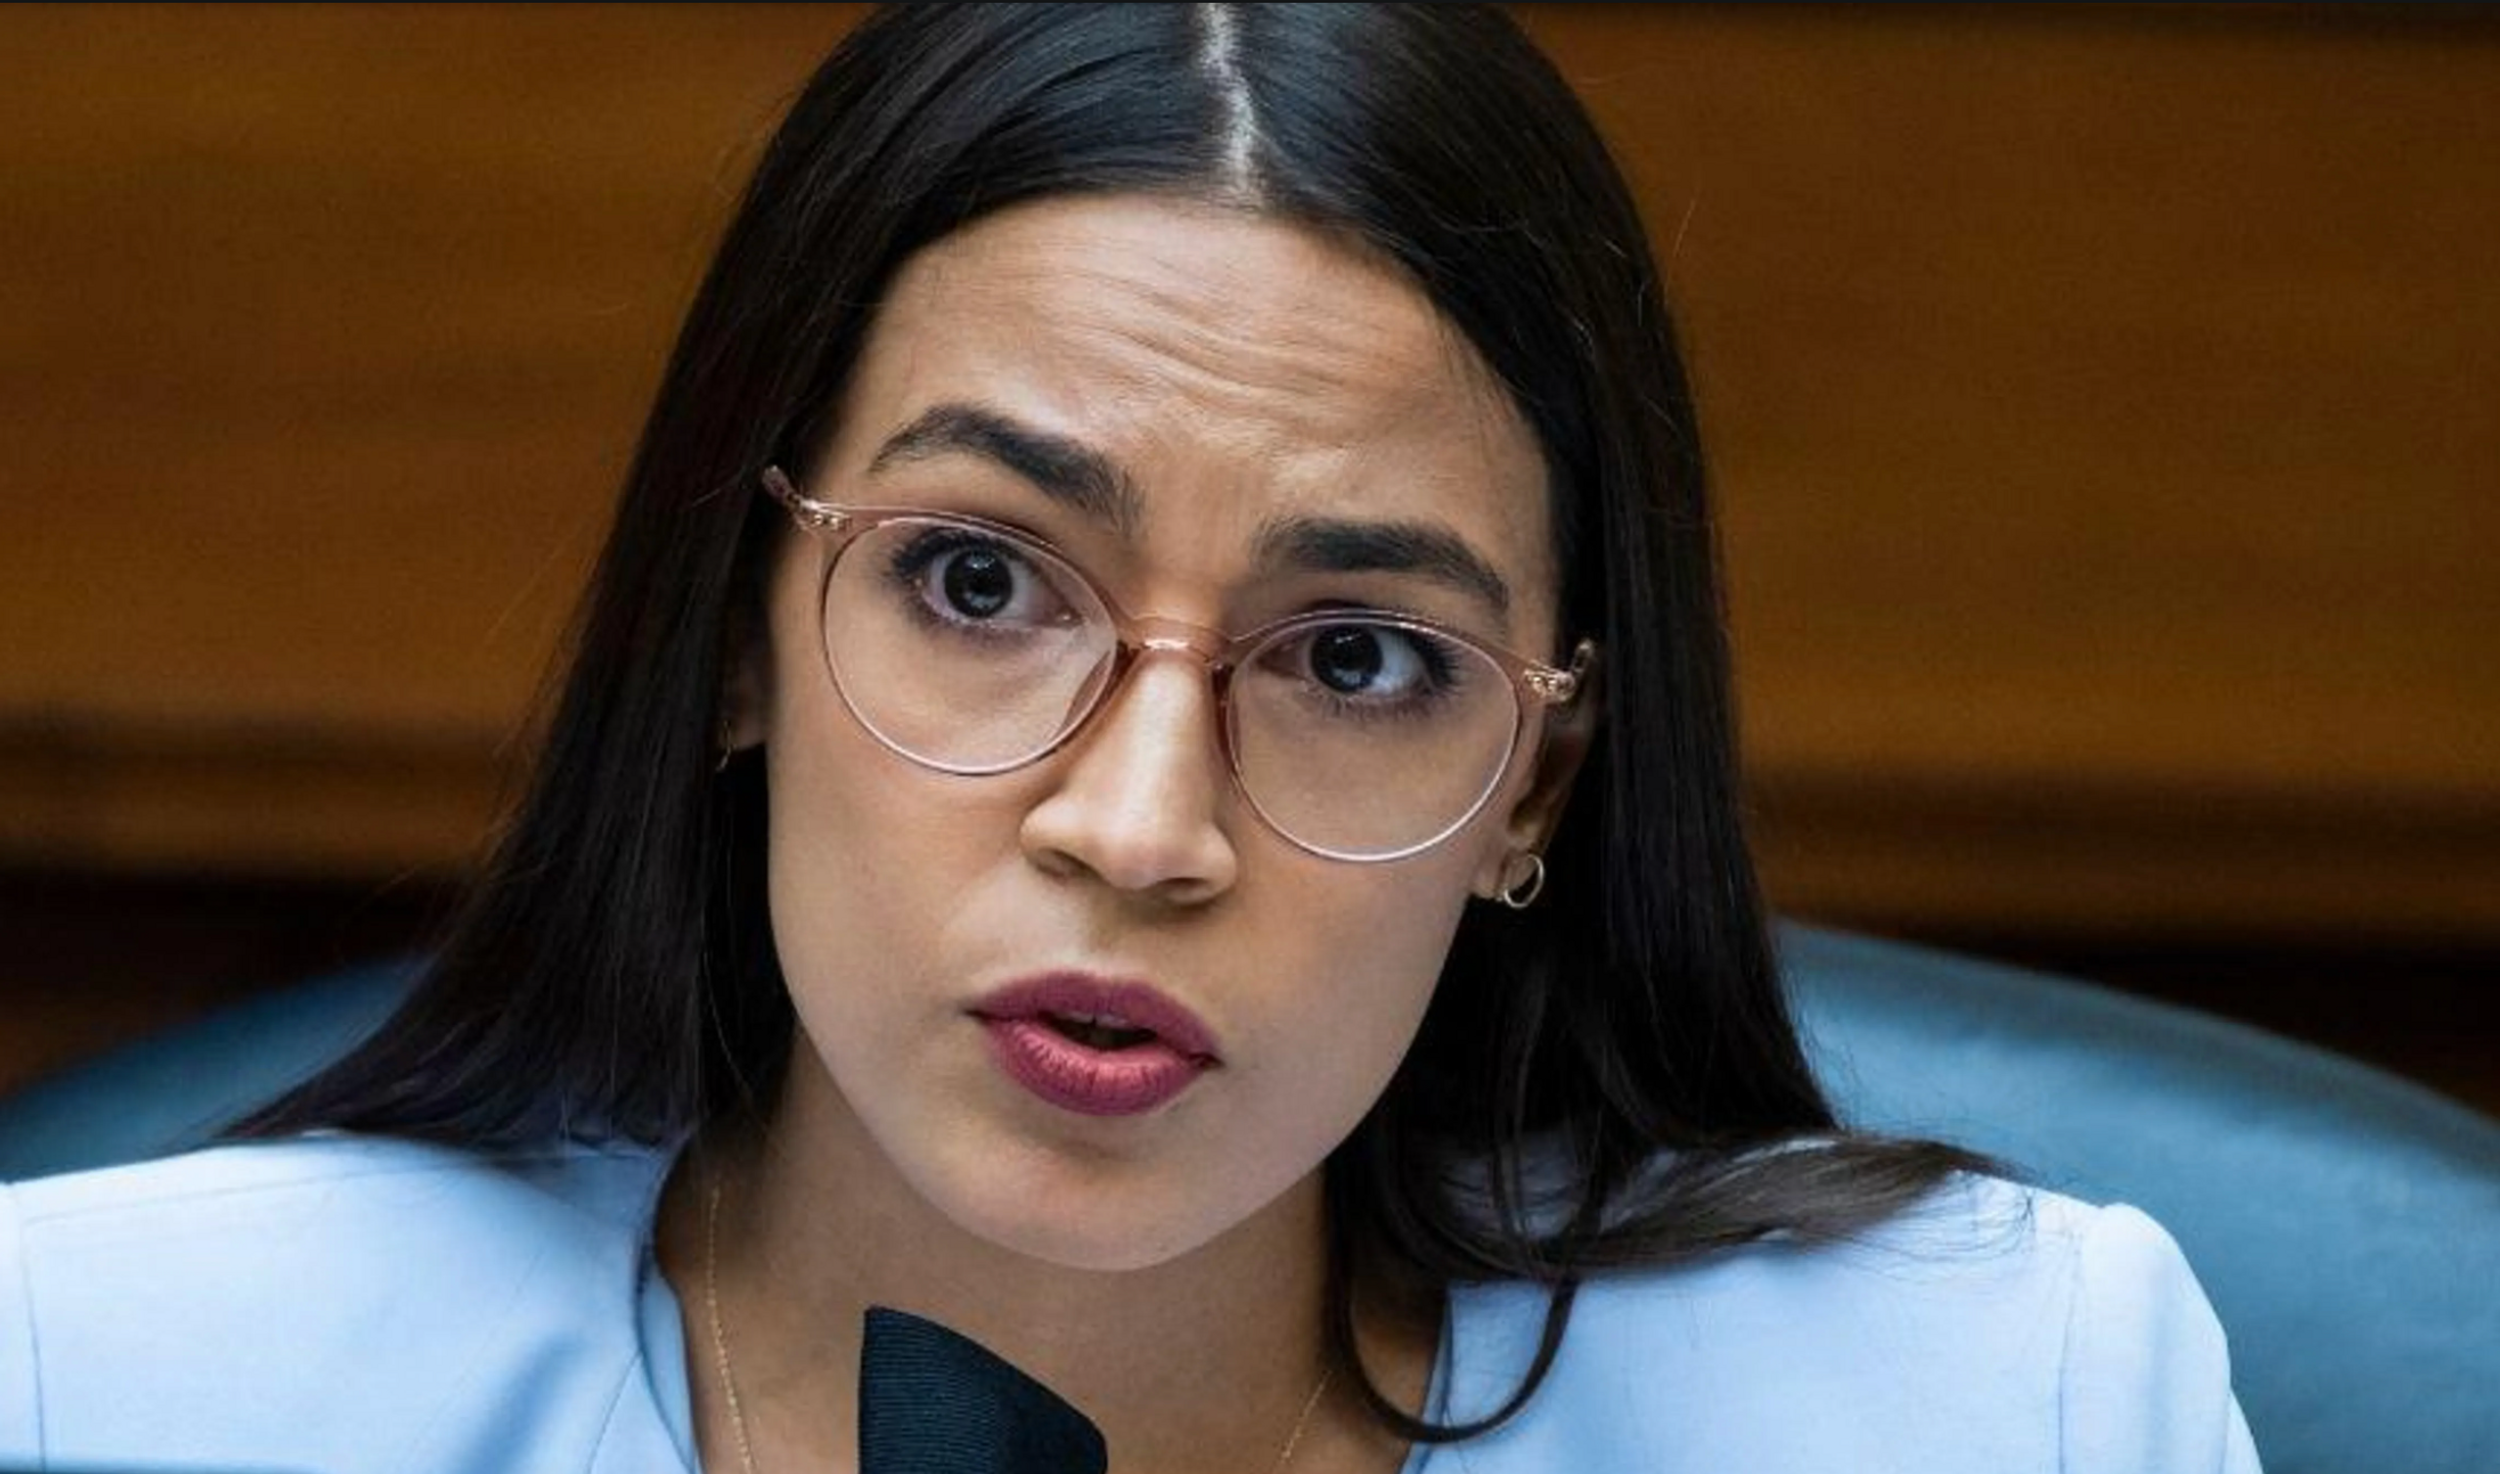 AOC Expertly Shreds GOP’s Obsession With Defining ‘Woman’ in Blunt Tweet